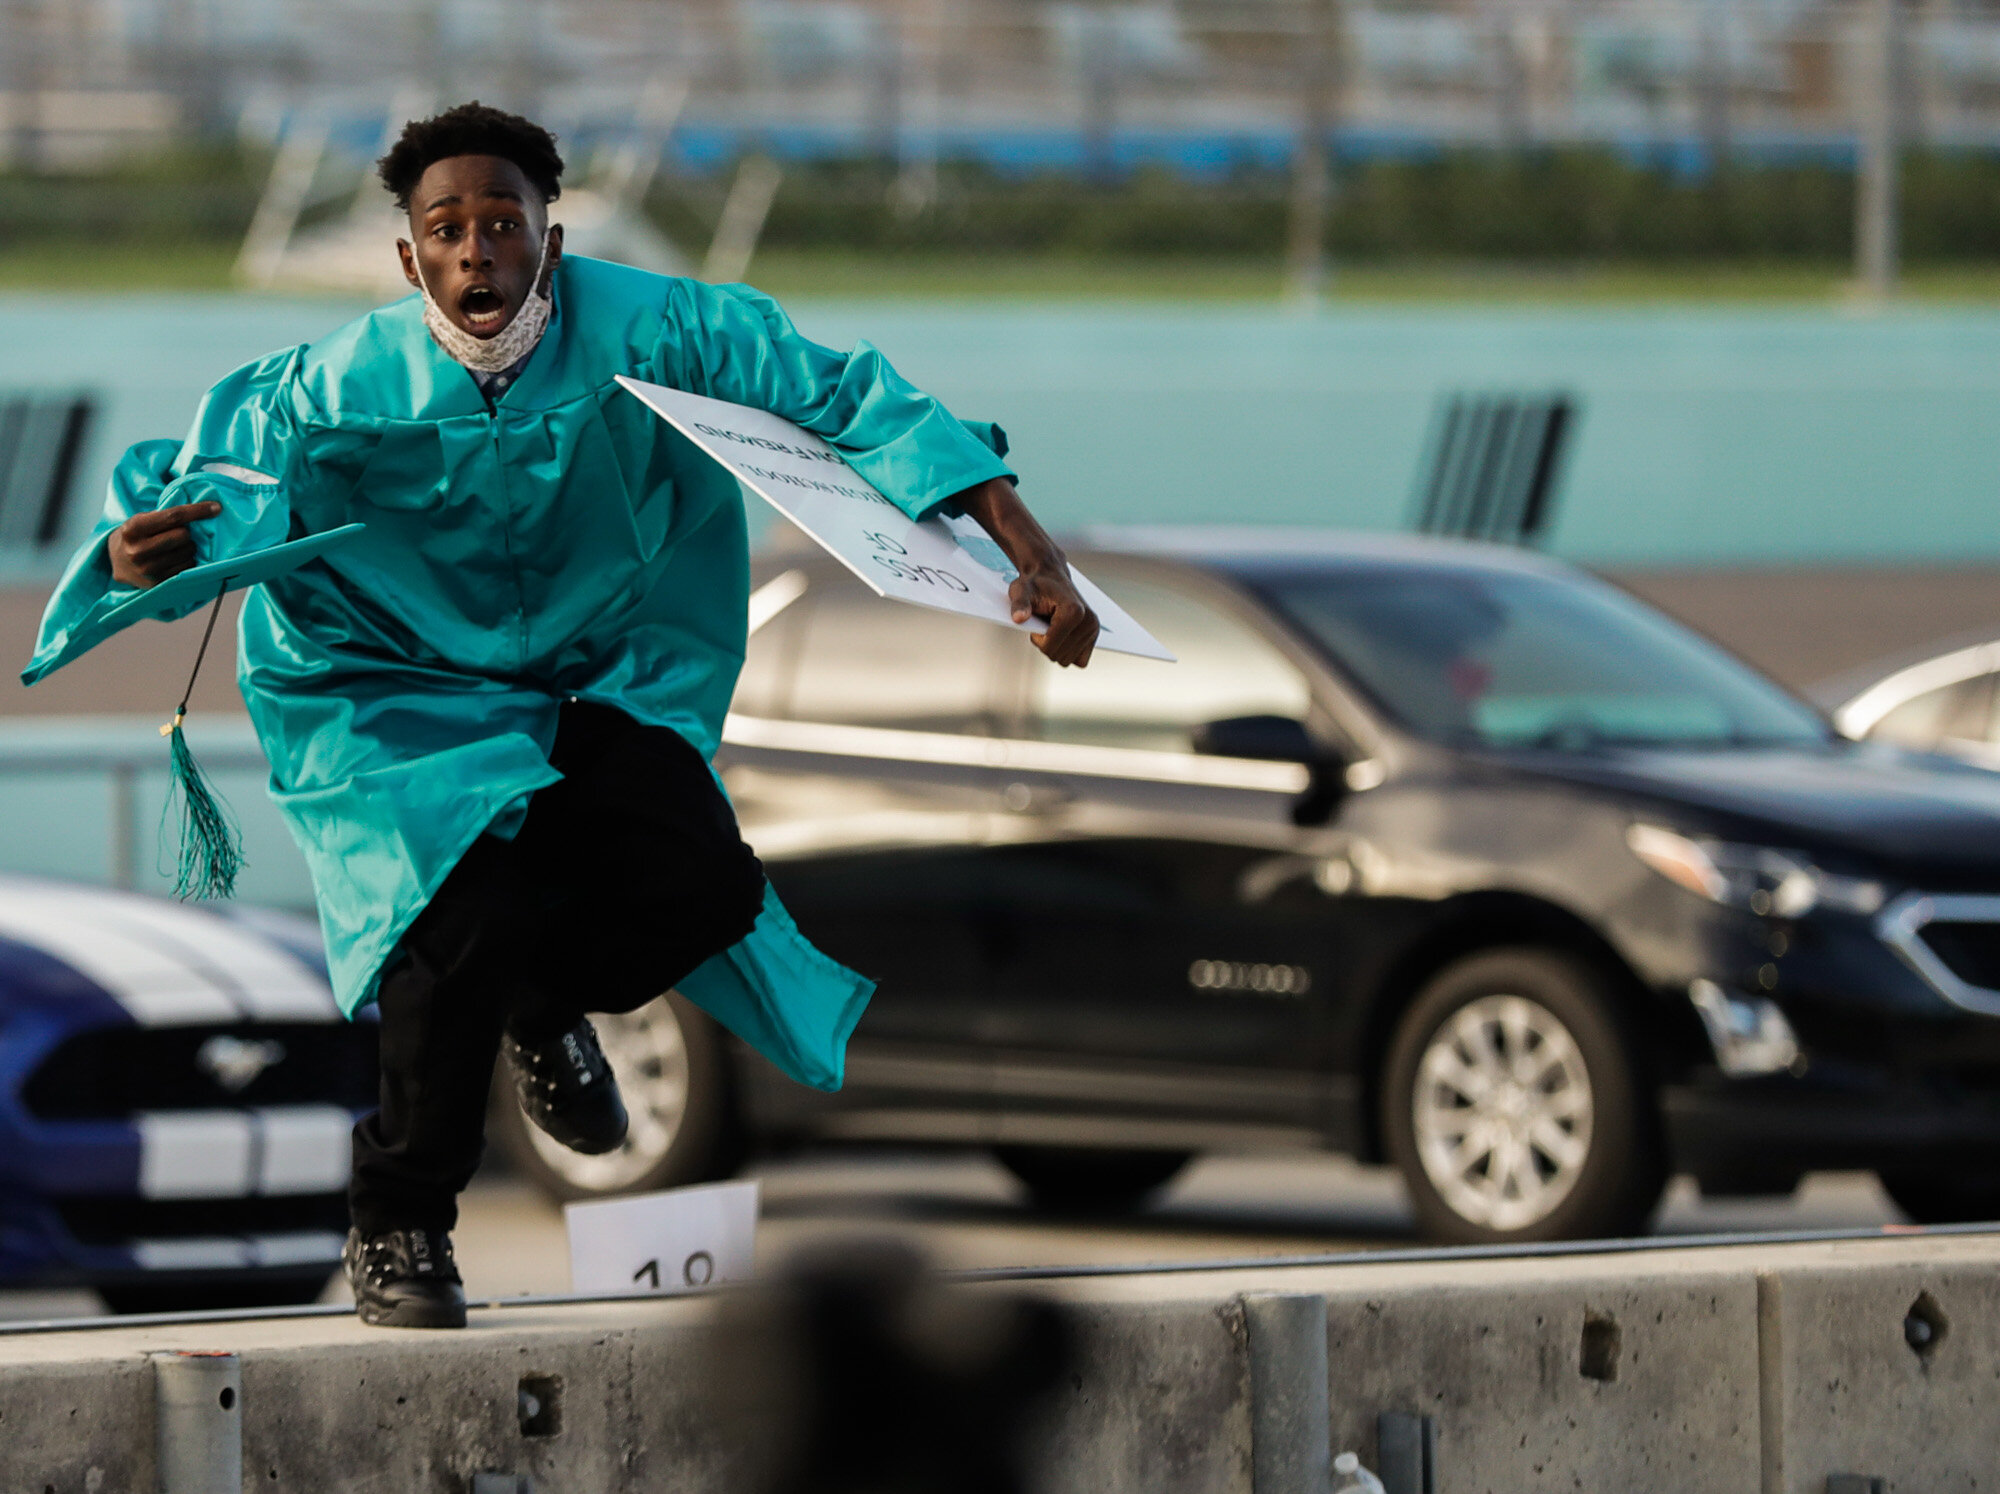  Richardson Fremond leaps over a wall as he runs to collect an award during the Chambers High School graduation ceremony at Homestead-Miami Speedway in Homestead, Fla., on June 23, 2020. The ceremony was held at the race track to enable social distan